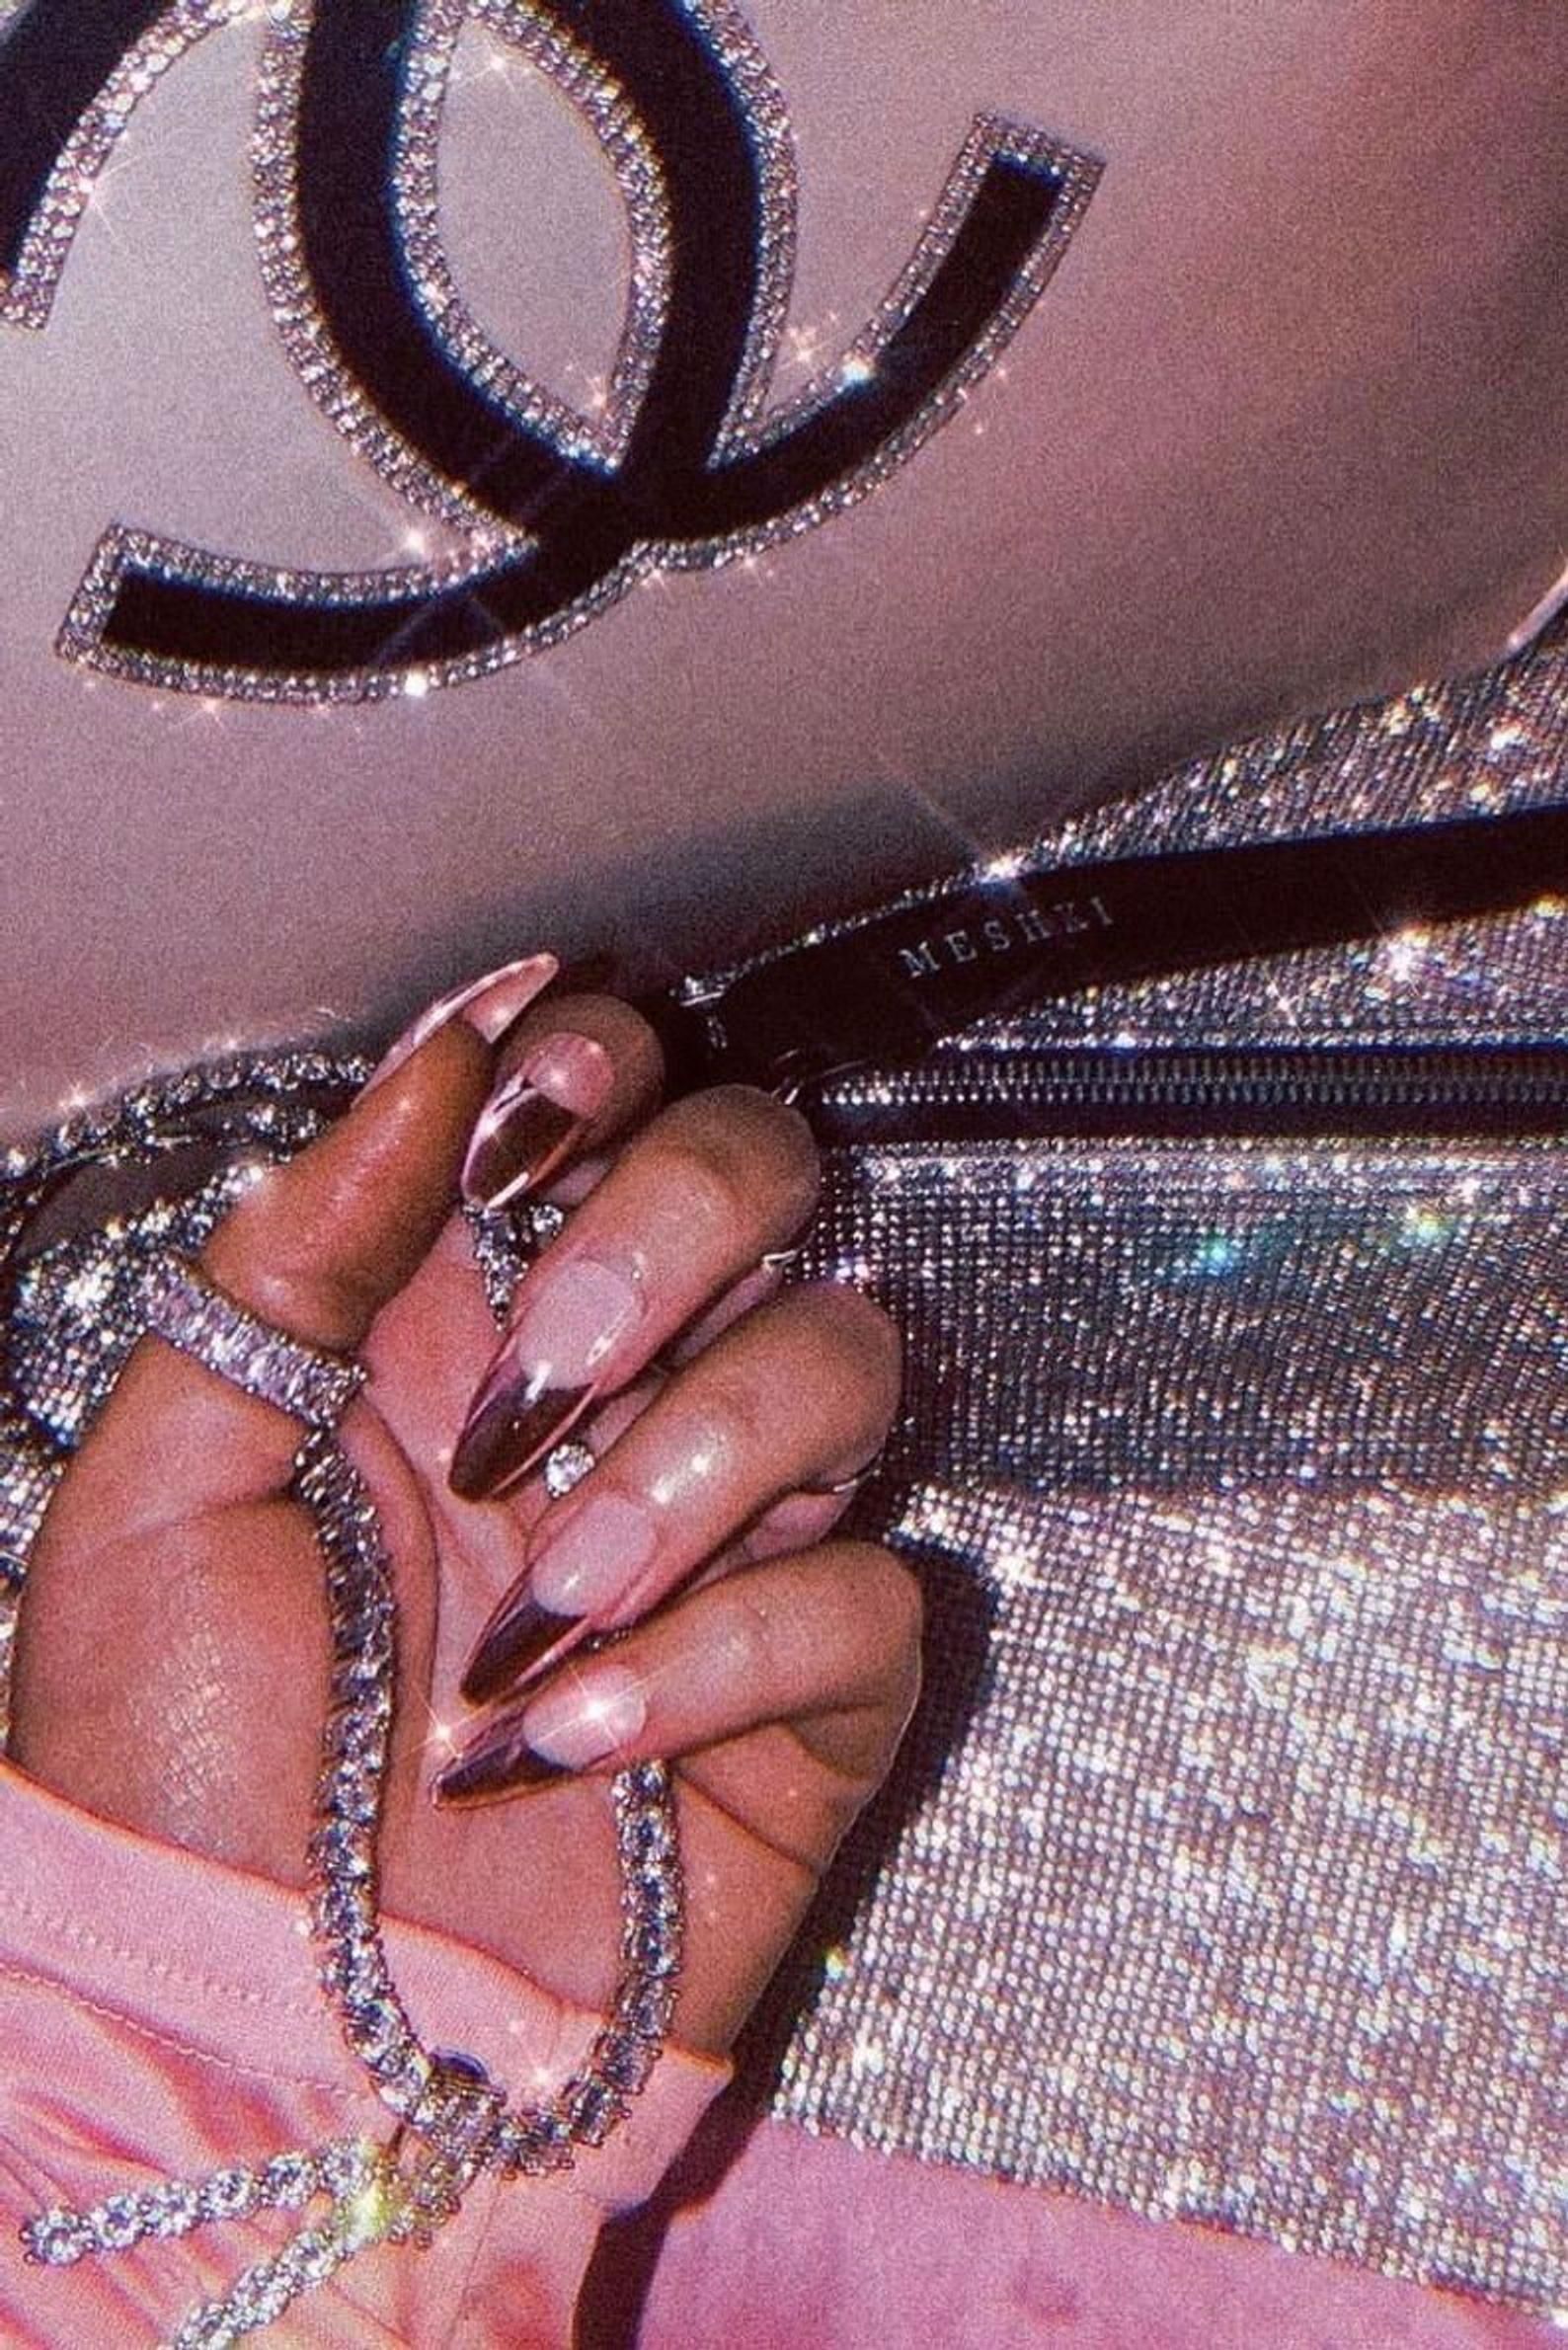 A woman with long nails holding onto her purse - Nails, bling